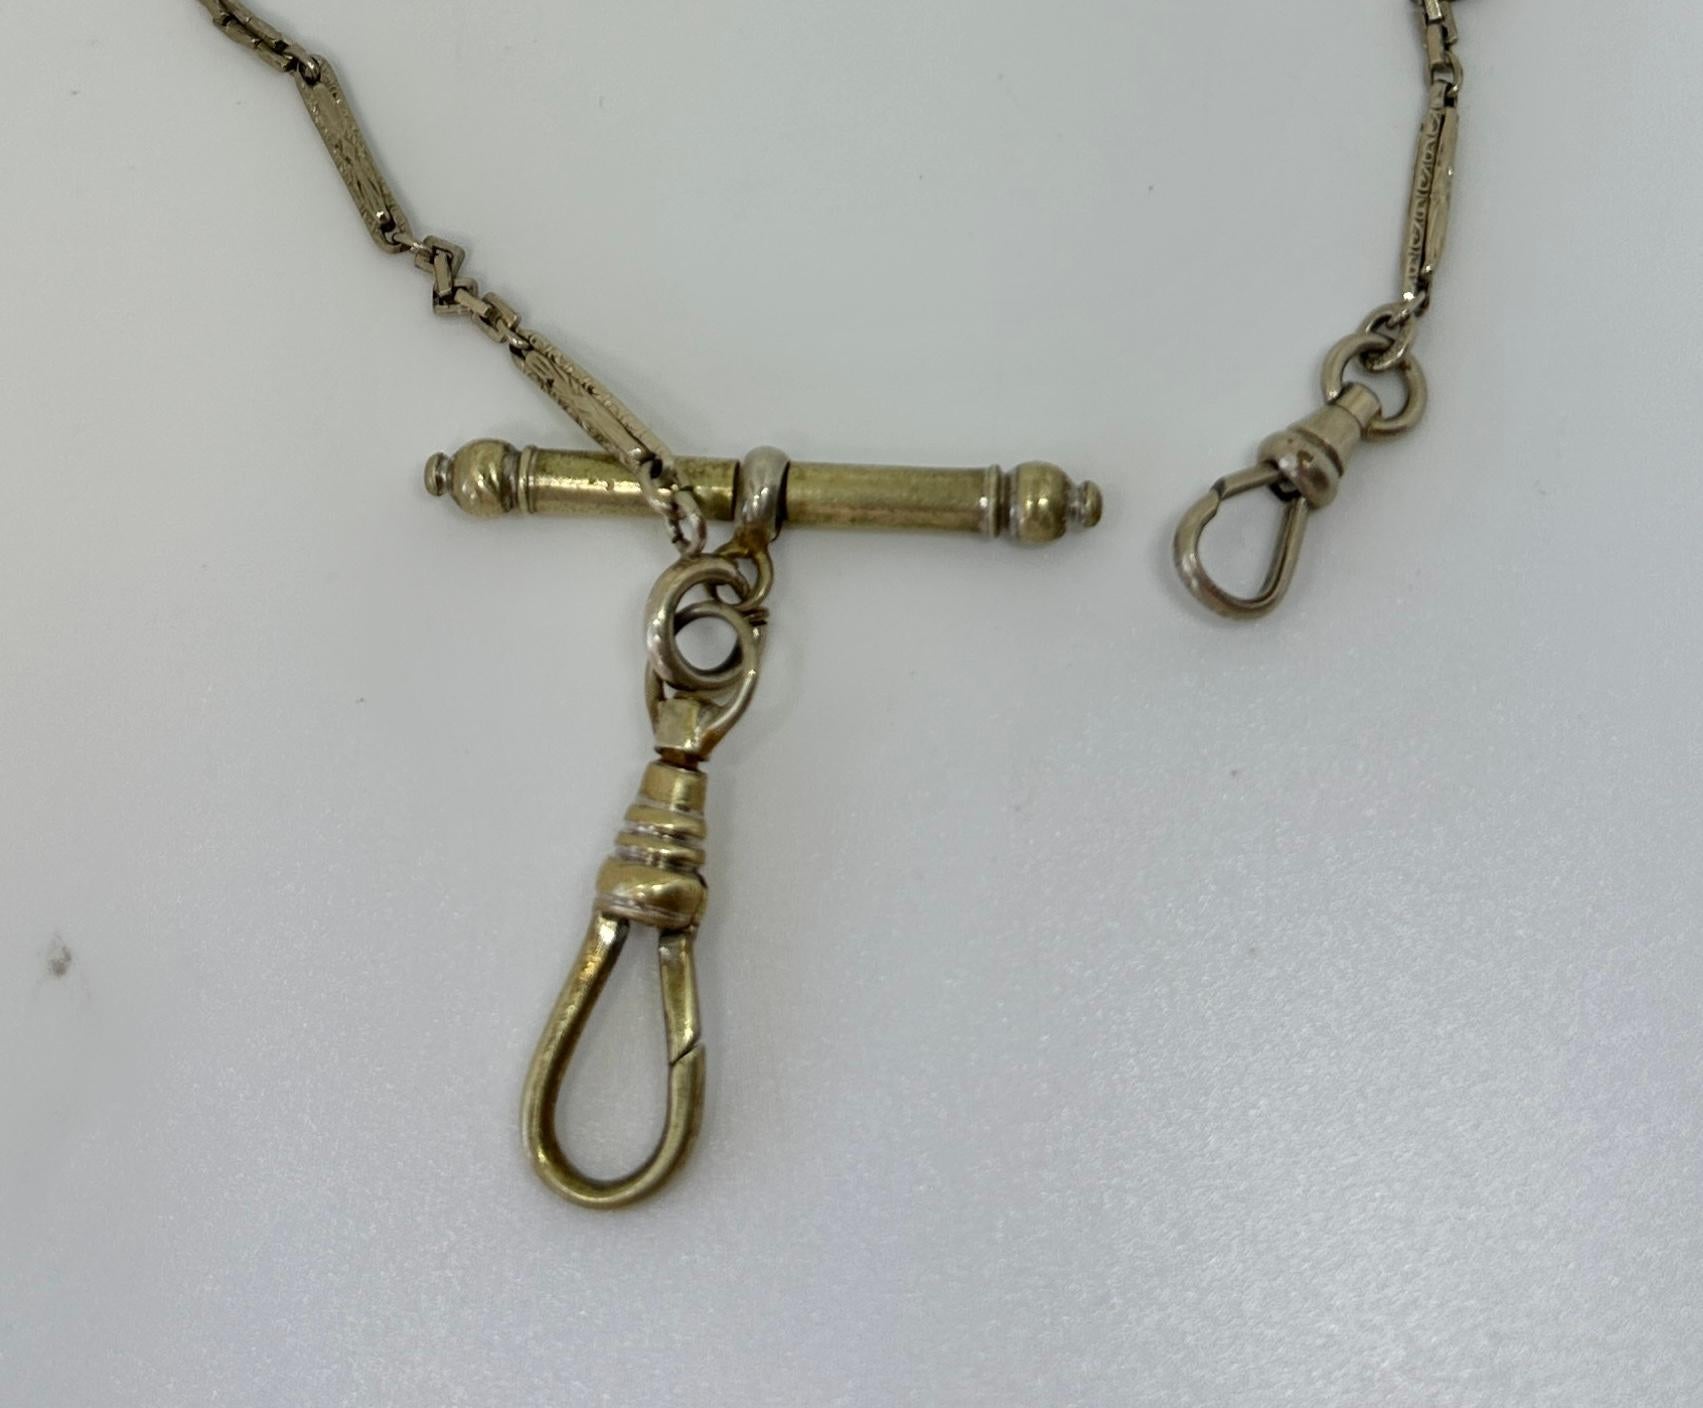 Victorian Albert Chain Necklace 2 Dog Clips White Gold Filled Fancy Link T Bar In Excellent Condition For Sale In New York, NY